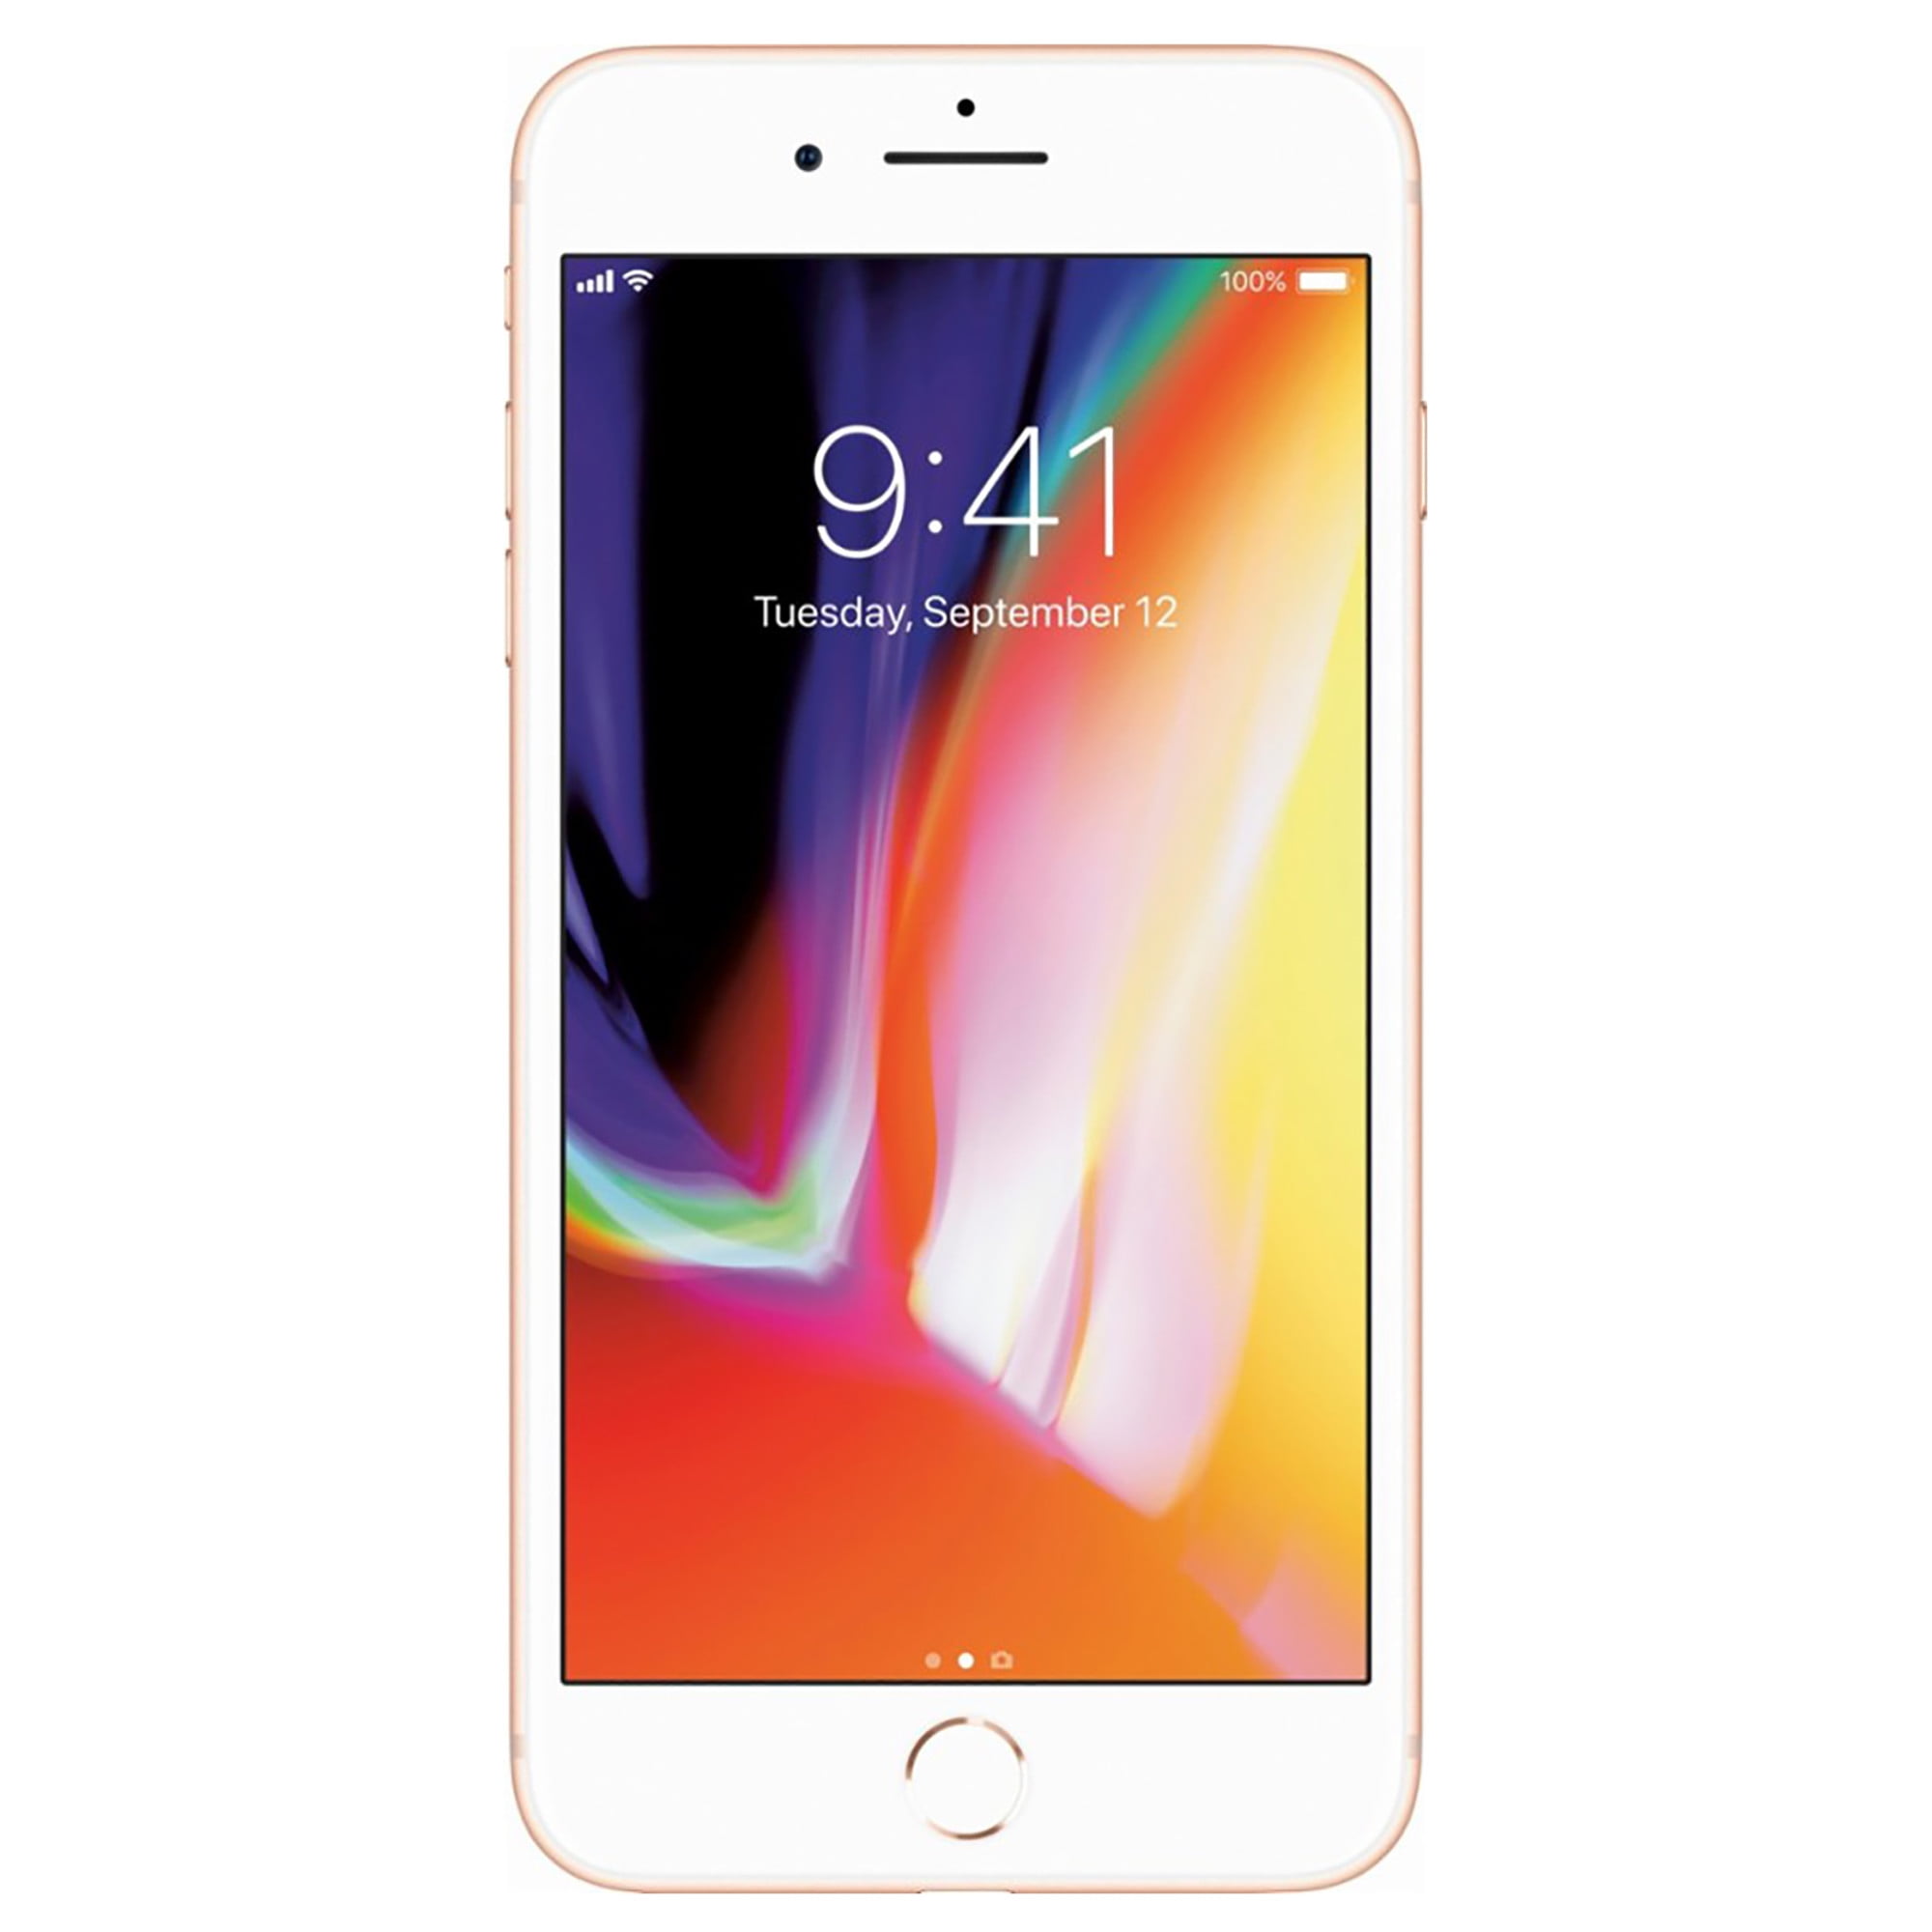 Apple iPhone 8 Plus 256GB Gold (T-Mobile Locked) Smartphone - Grade A  Refurbished